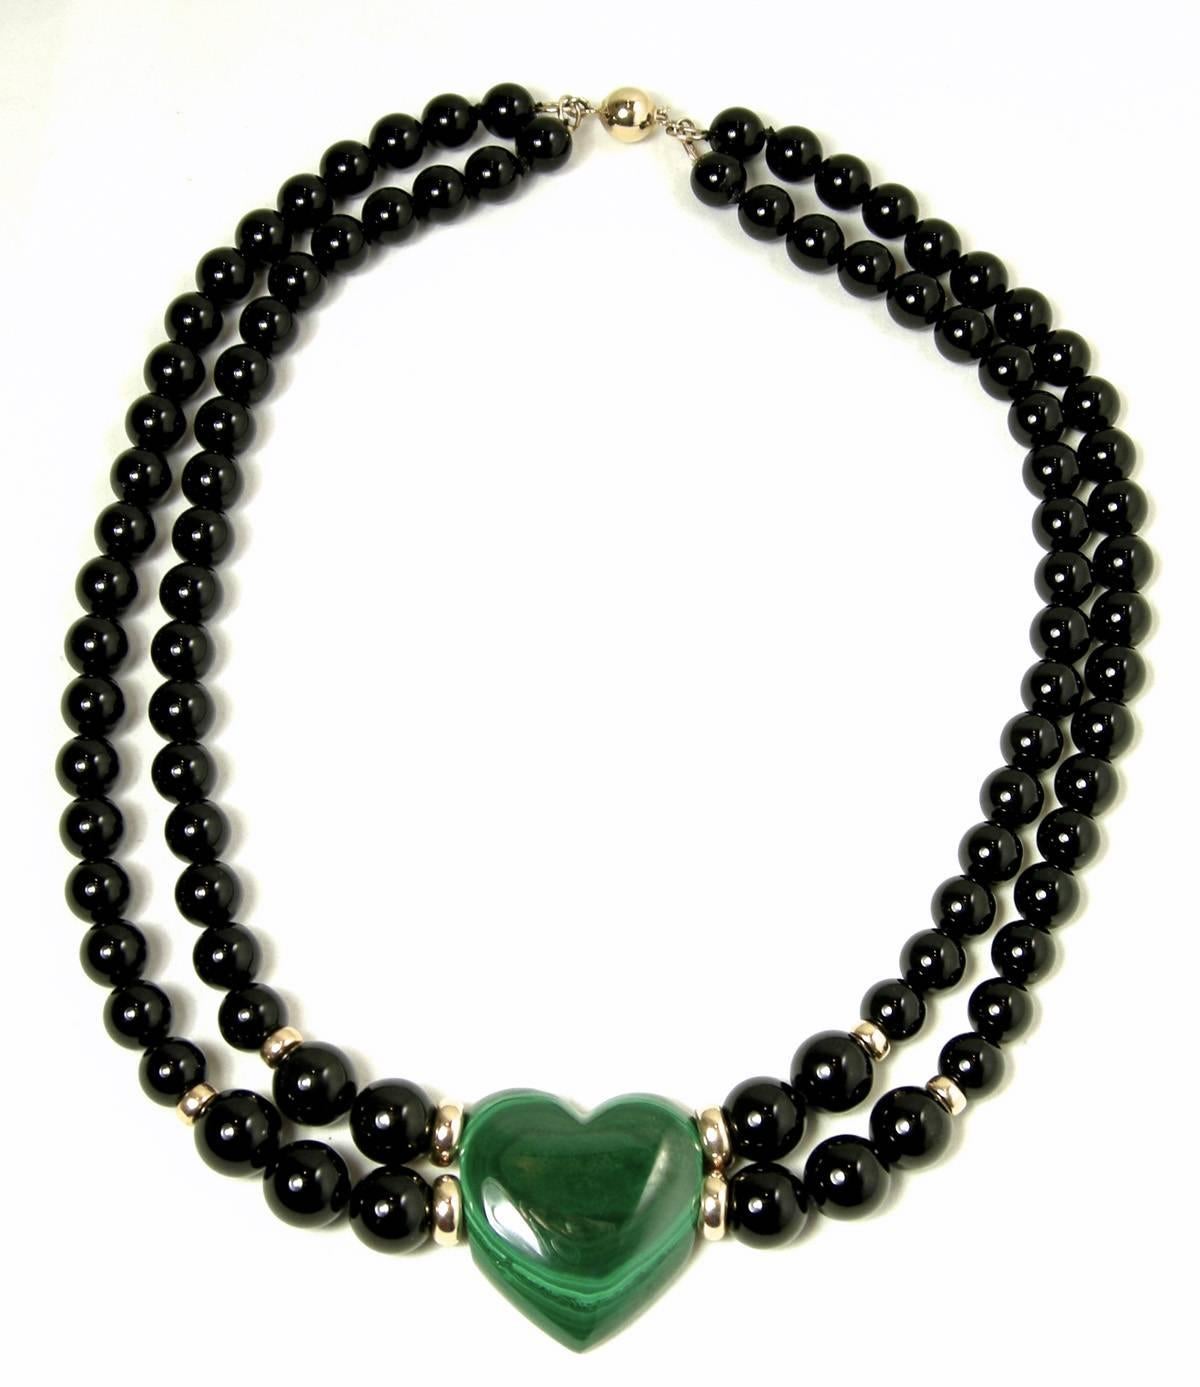 What an unusual find this is!  It has two rows of black onyx beads with a 14KT gold slide-in clasp and 14 KT gold spacers at the end of the necklace, which leads to a beautiful green malachite heart.  The necklace is 16” long.  The heart is 1” wide